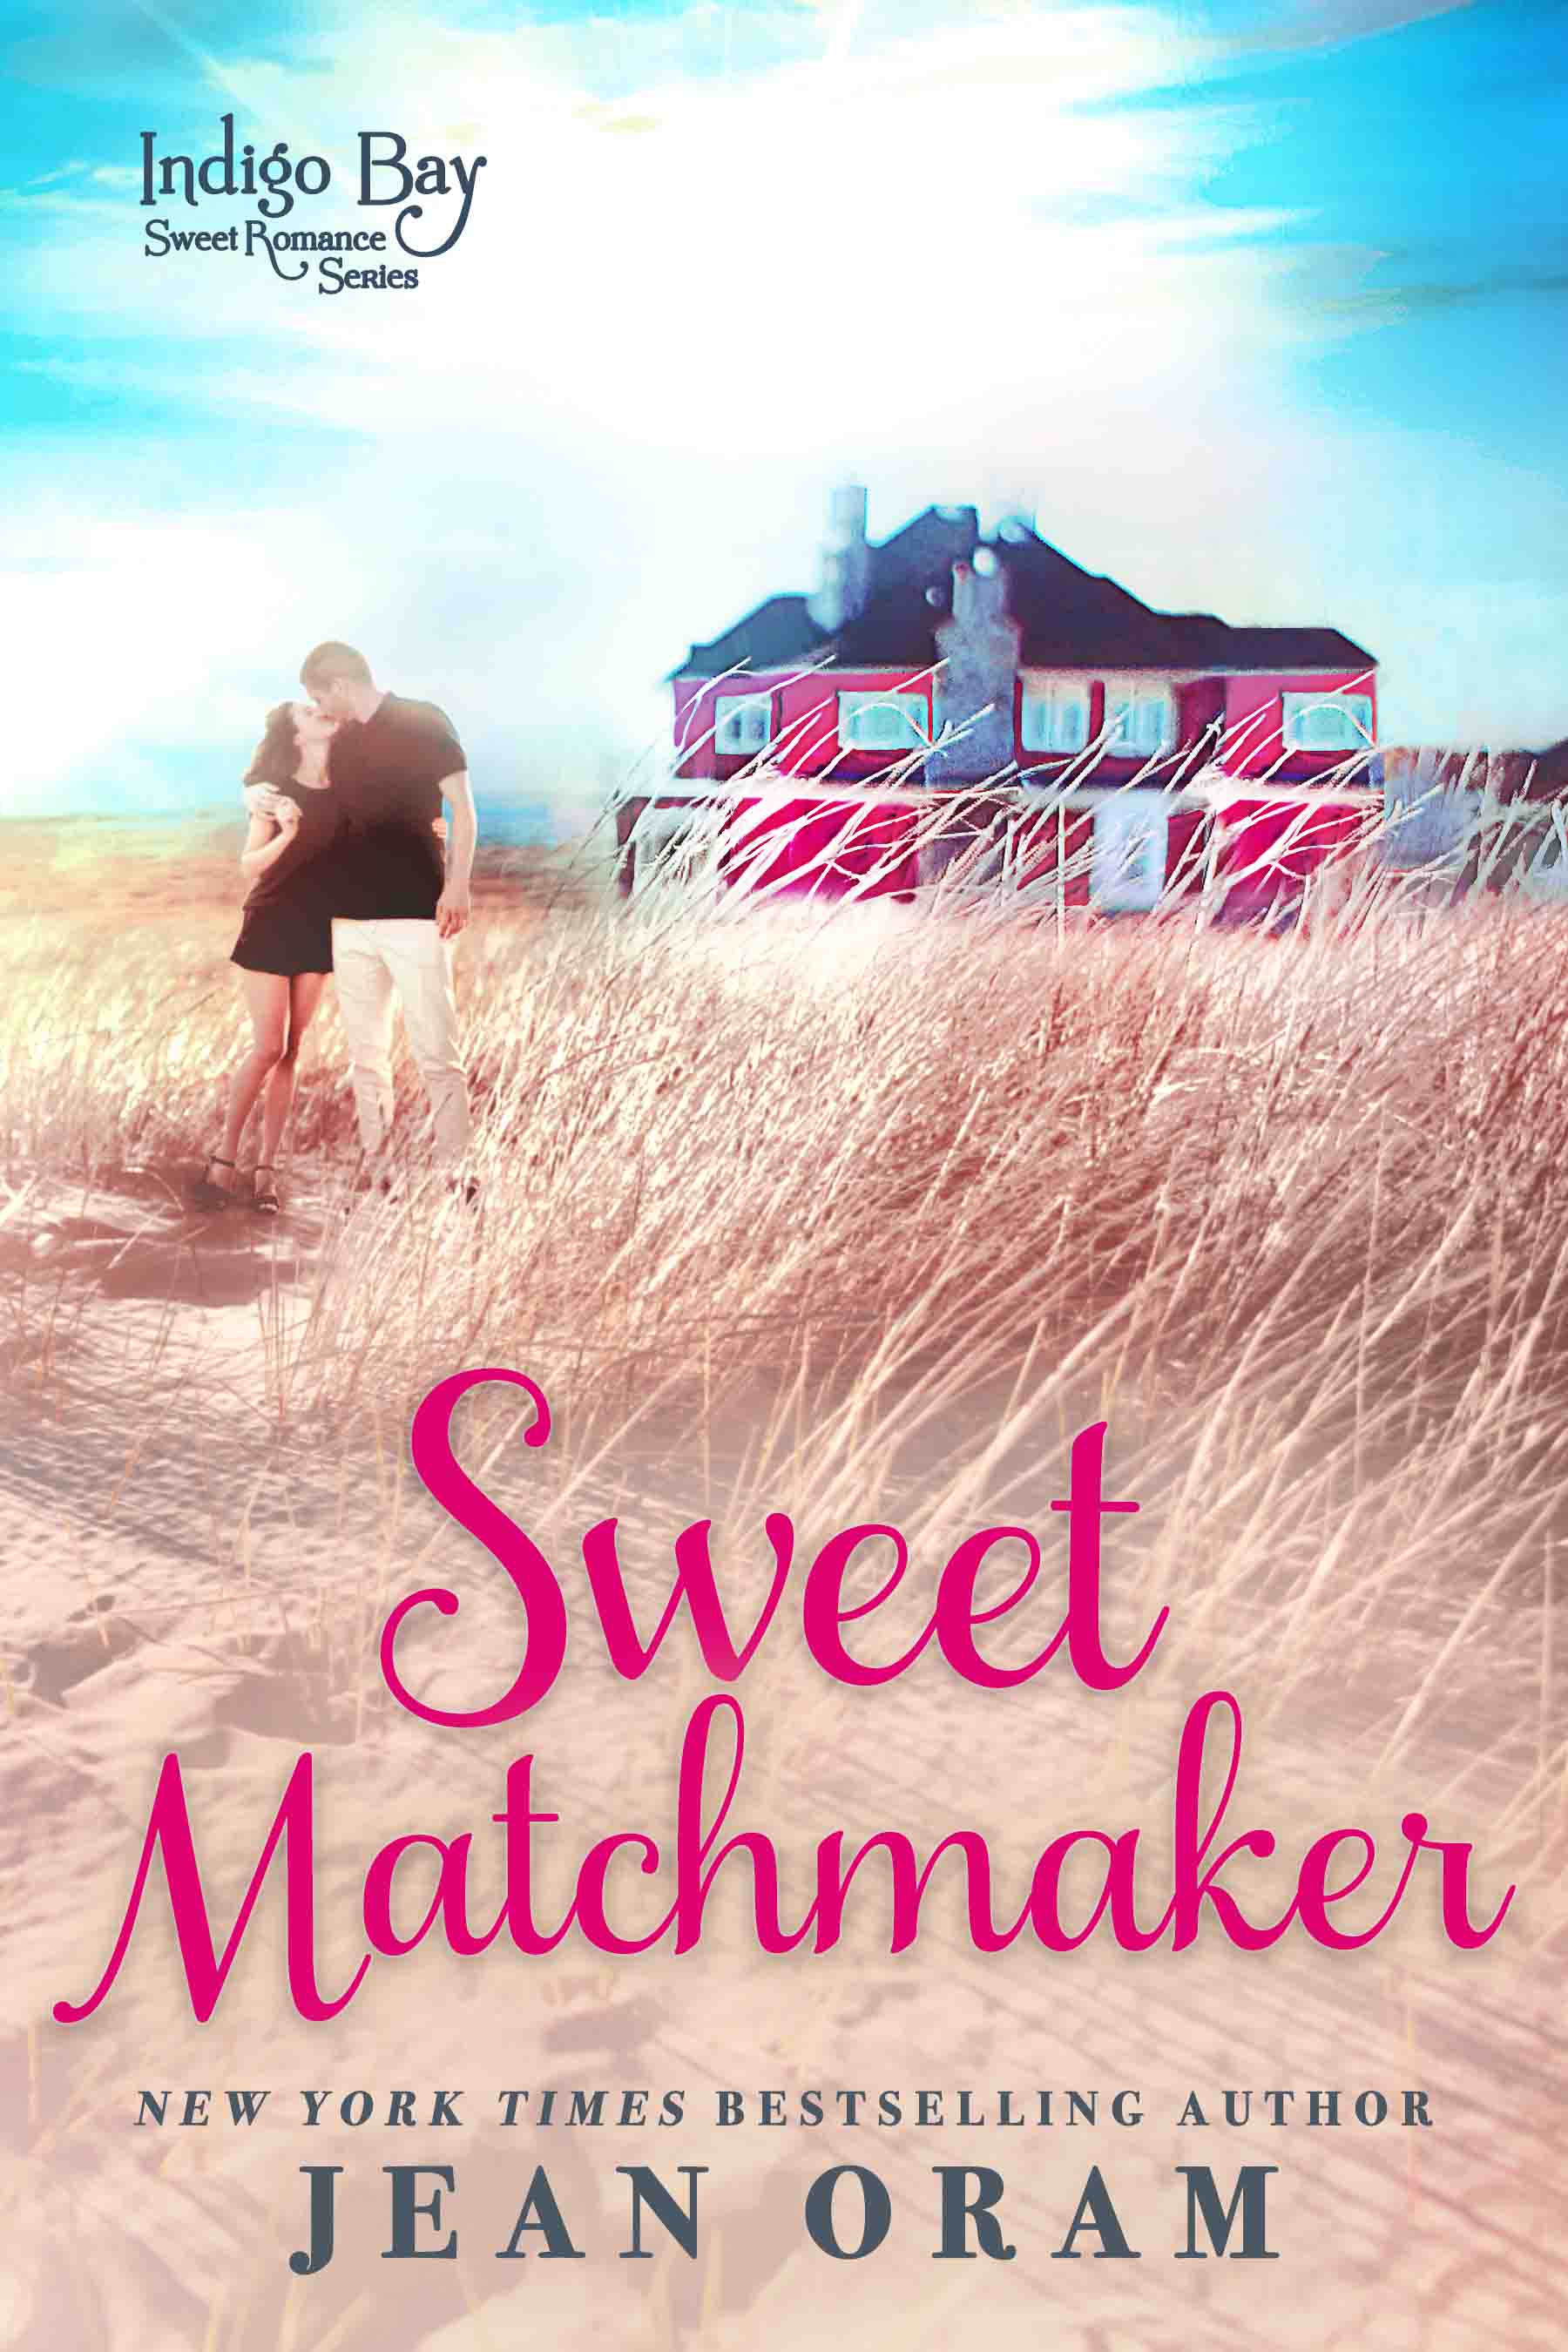 Sweet Matchmaker by Jean Oram, a sweet small town romnace, beach read indigo Bay